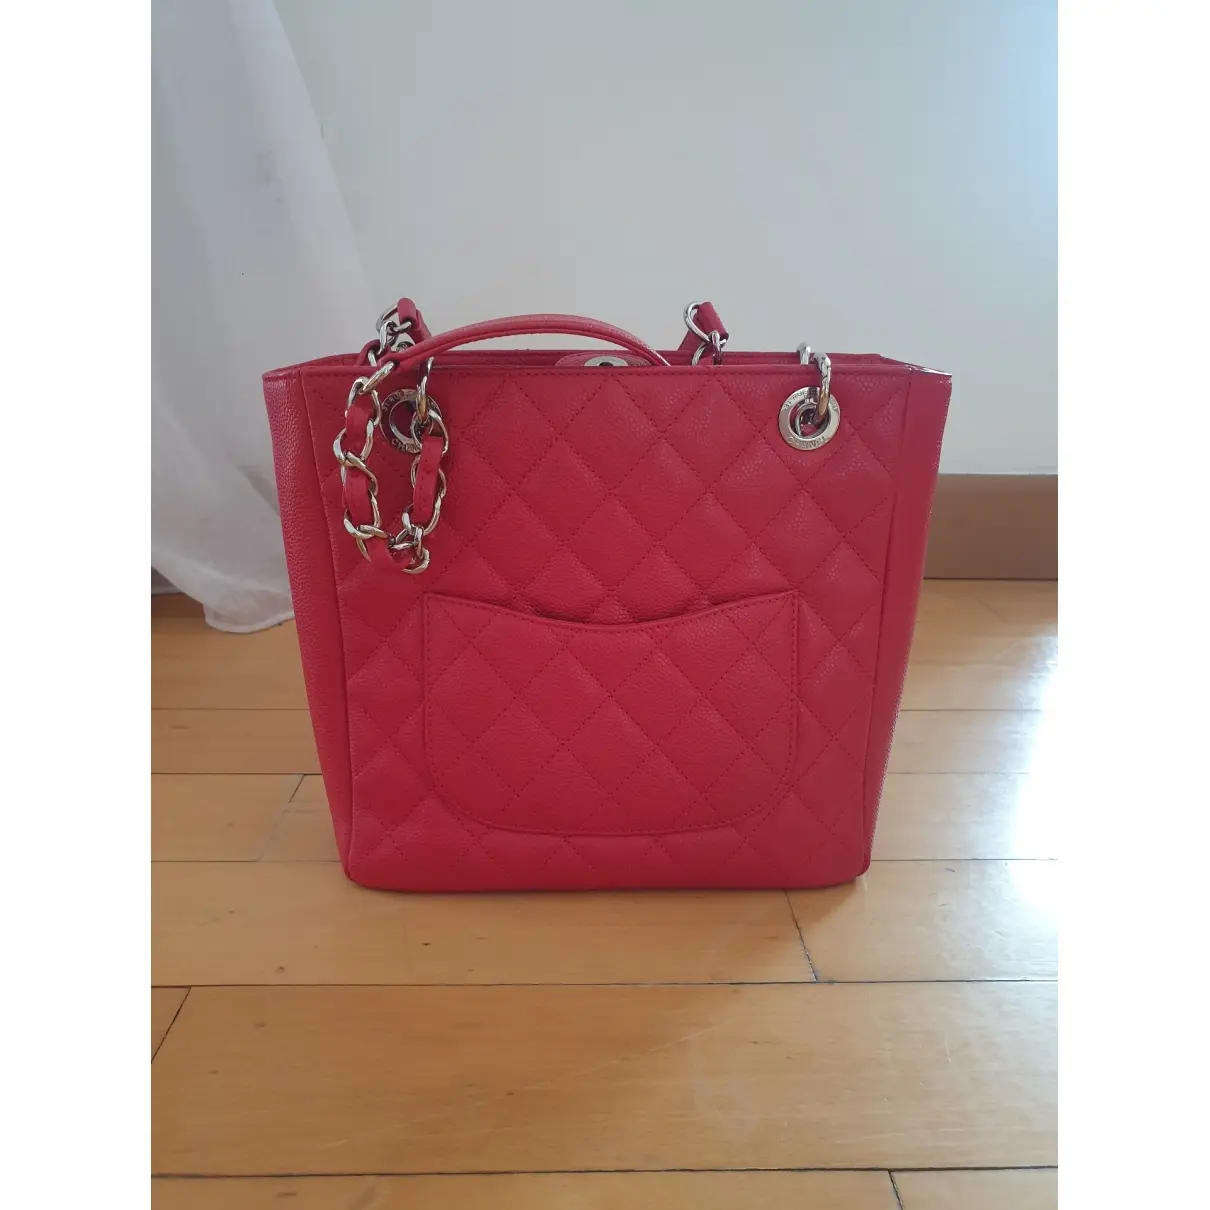 Chanel Petite Shopping Tote leather handbag for sale